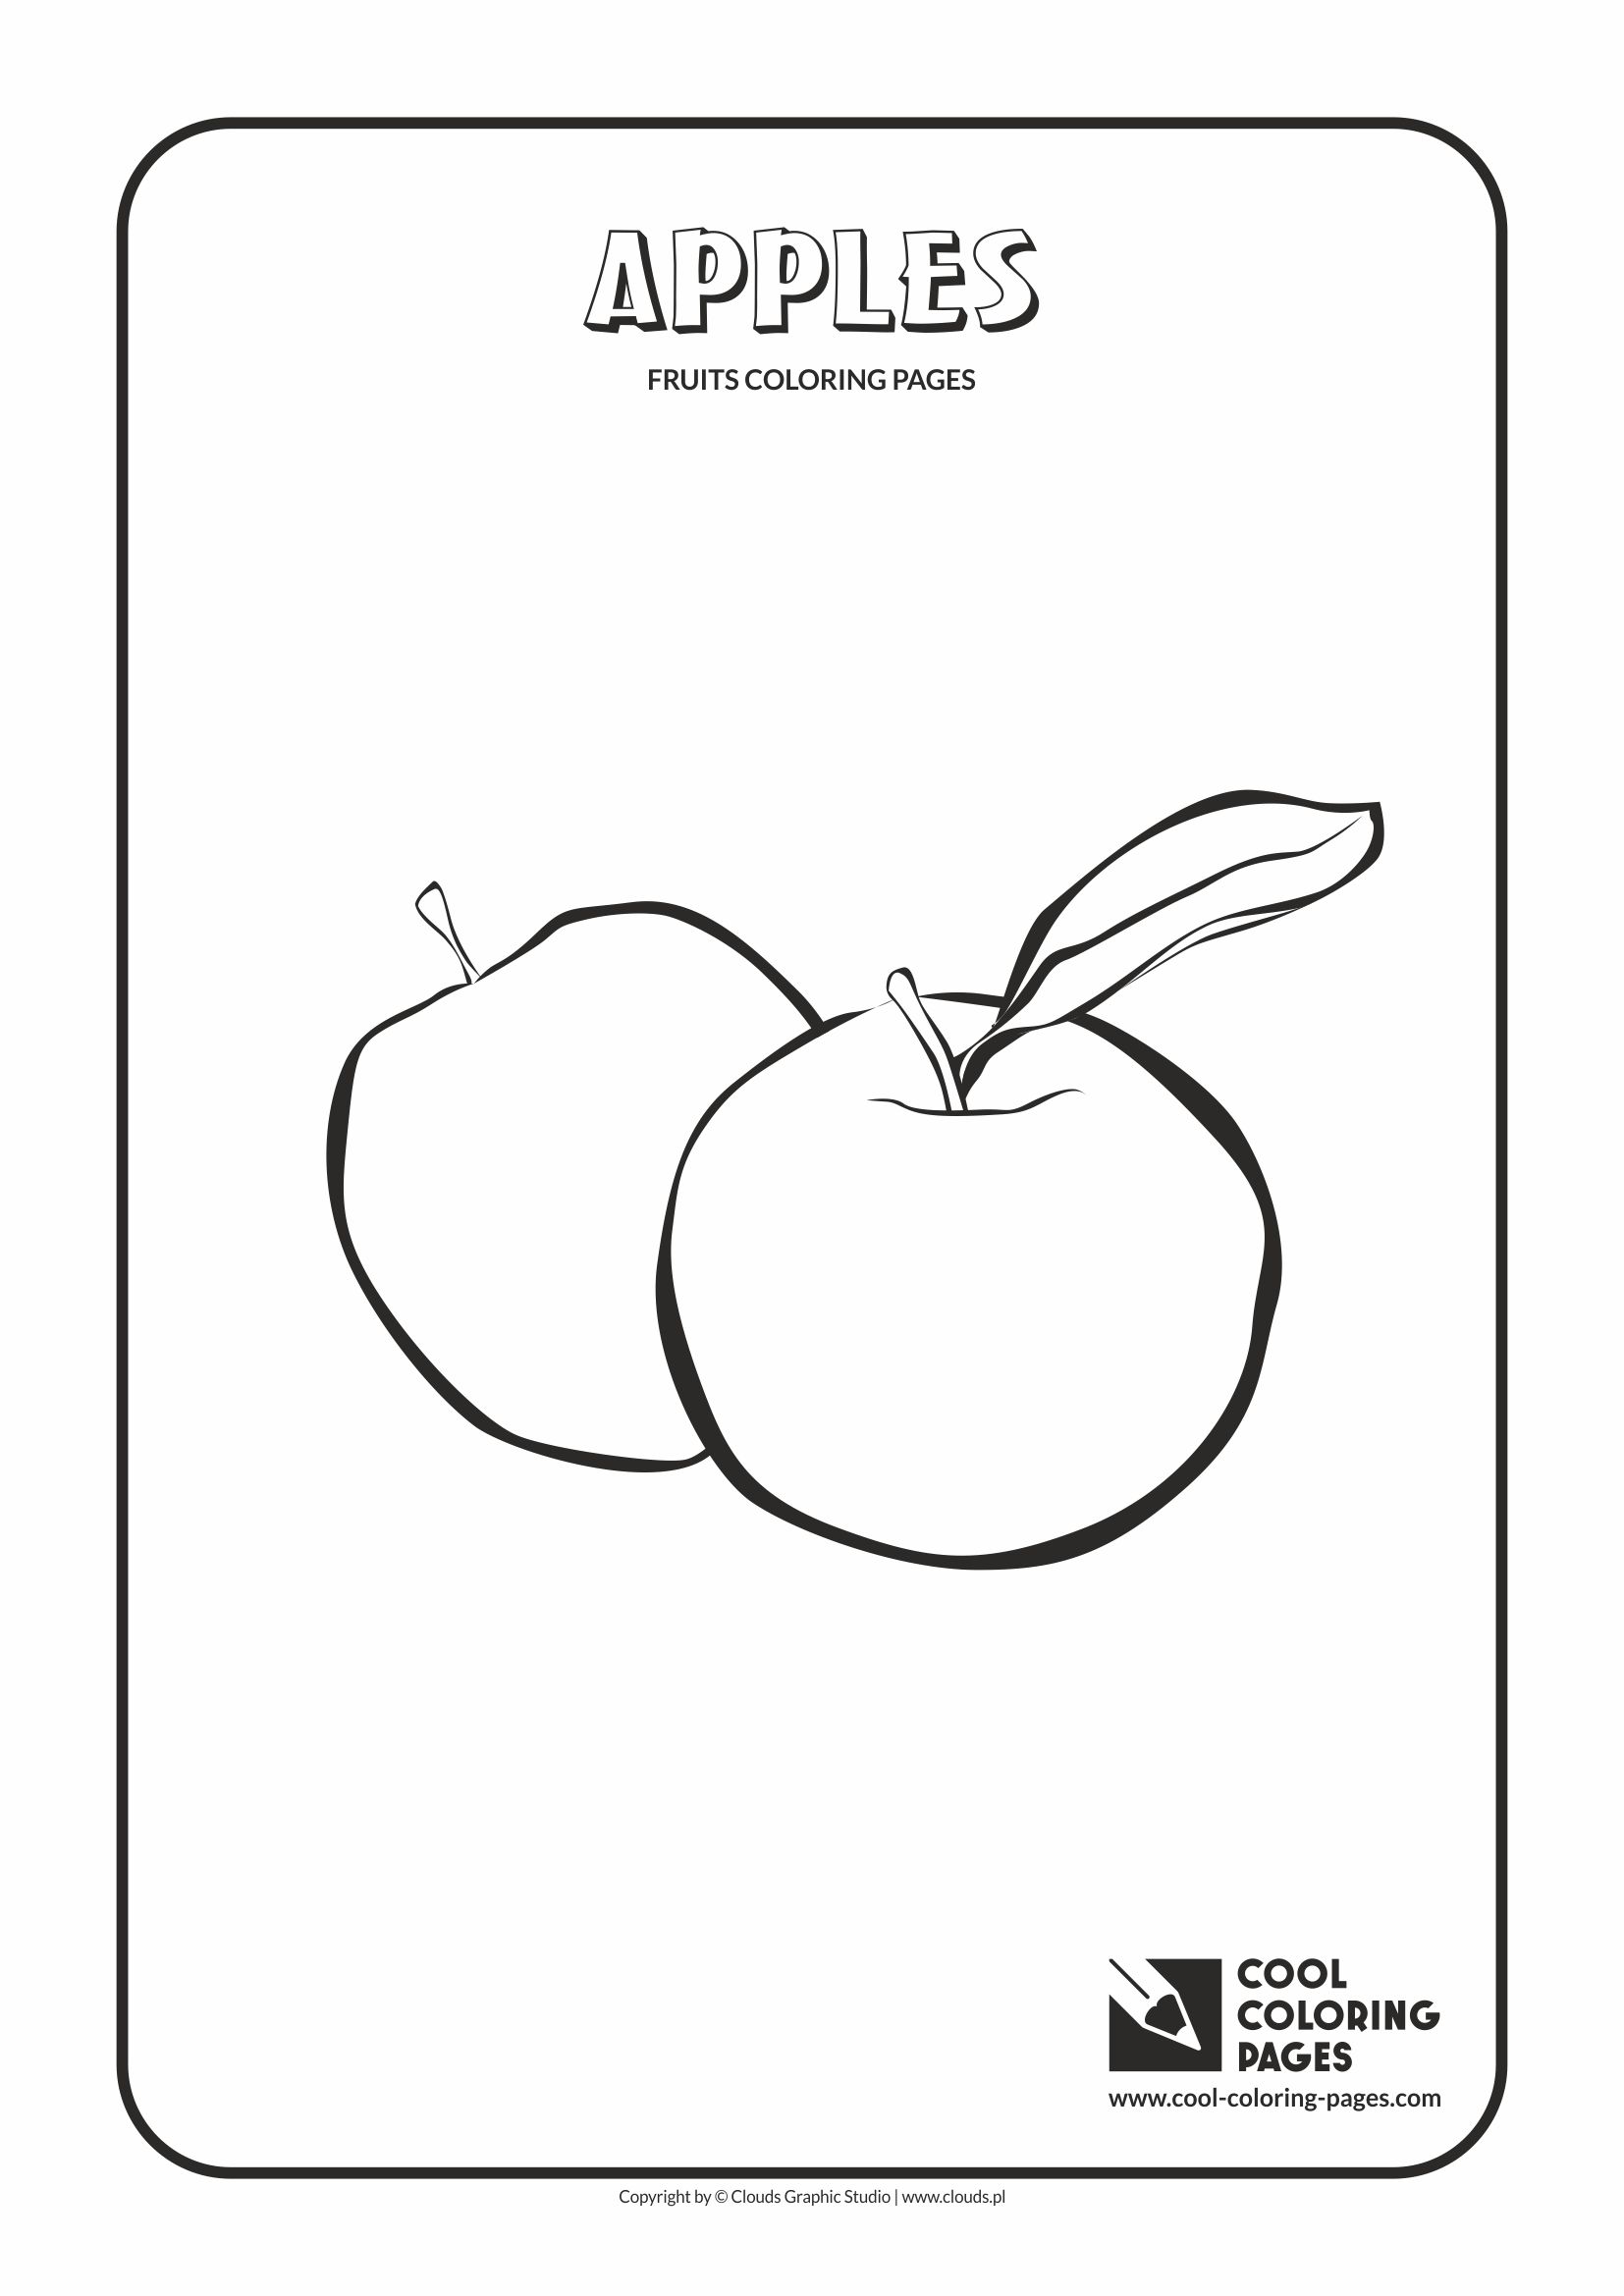 Cool Coloring Pages - Plants / Apples / Coloring page with apples